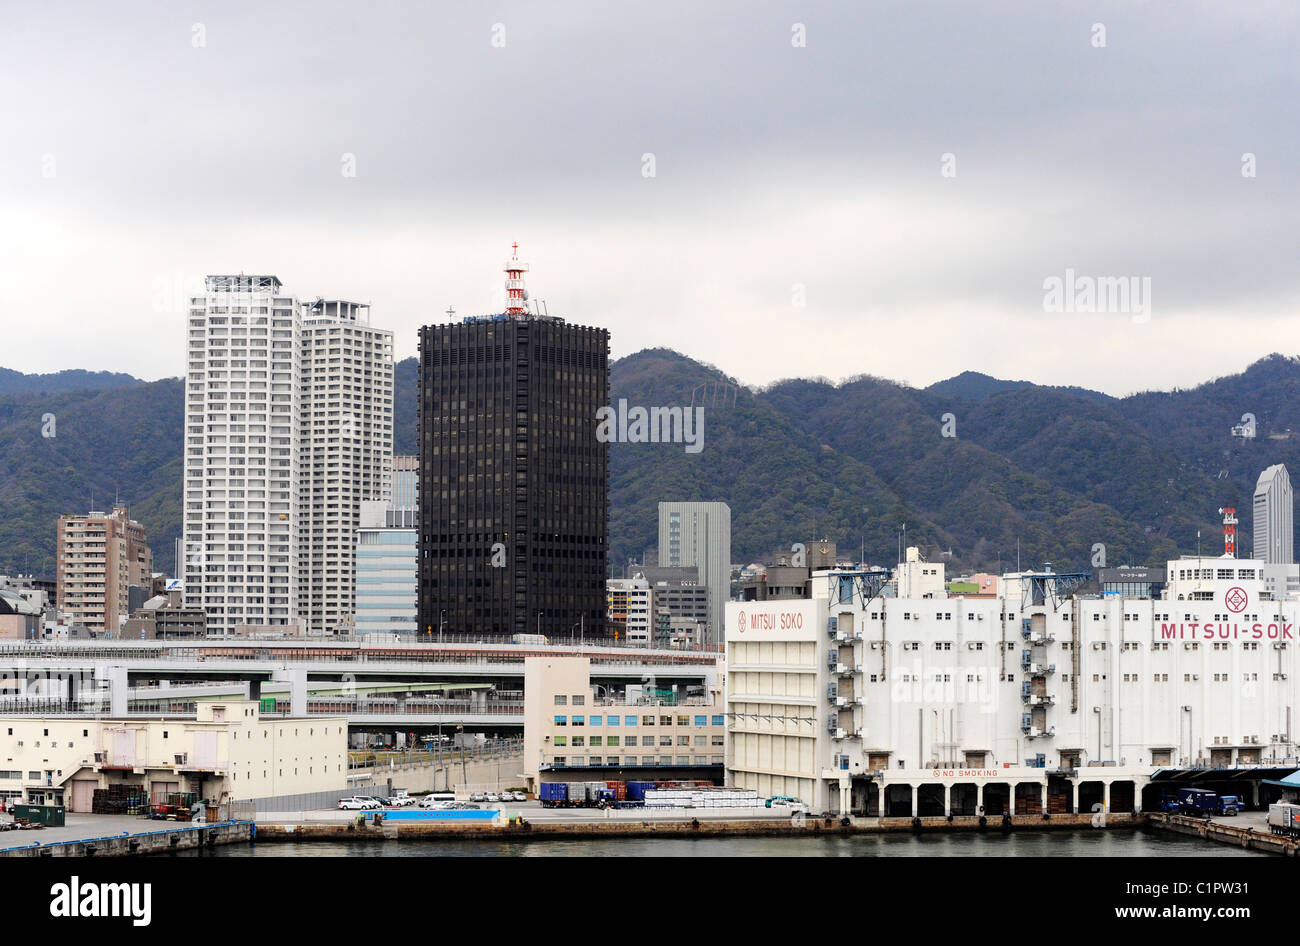 A view of the Port of Kobe, Japan with mitsui soko building Stock Photo